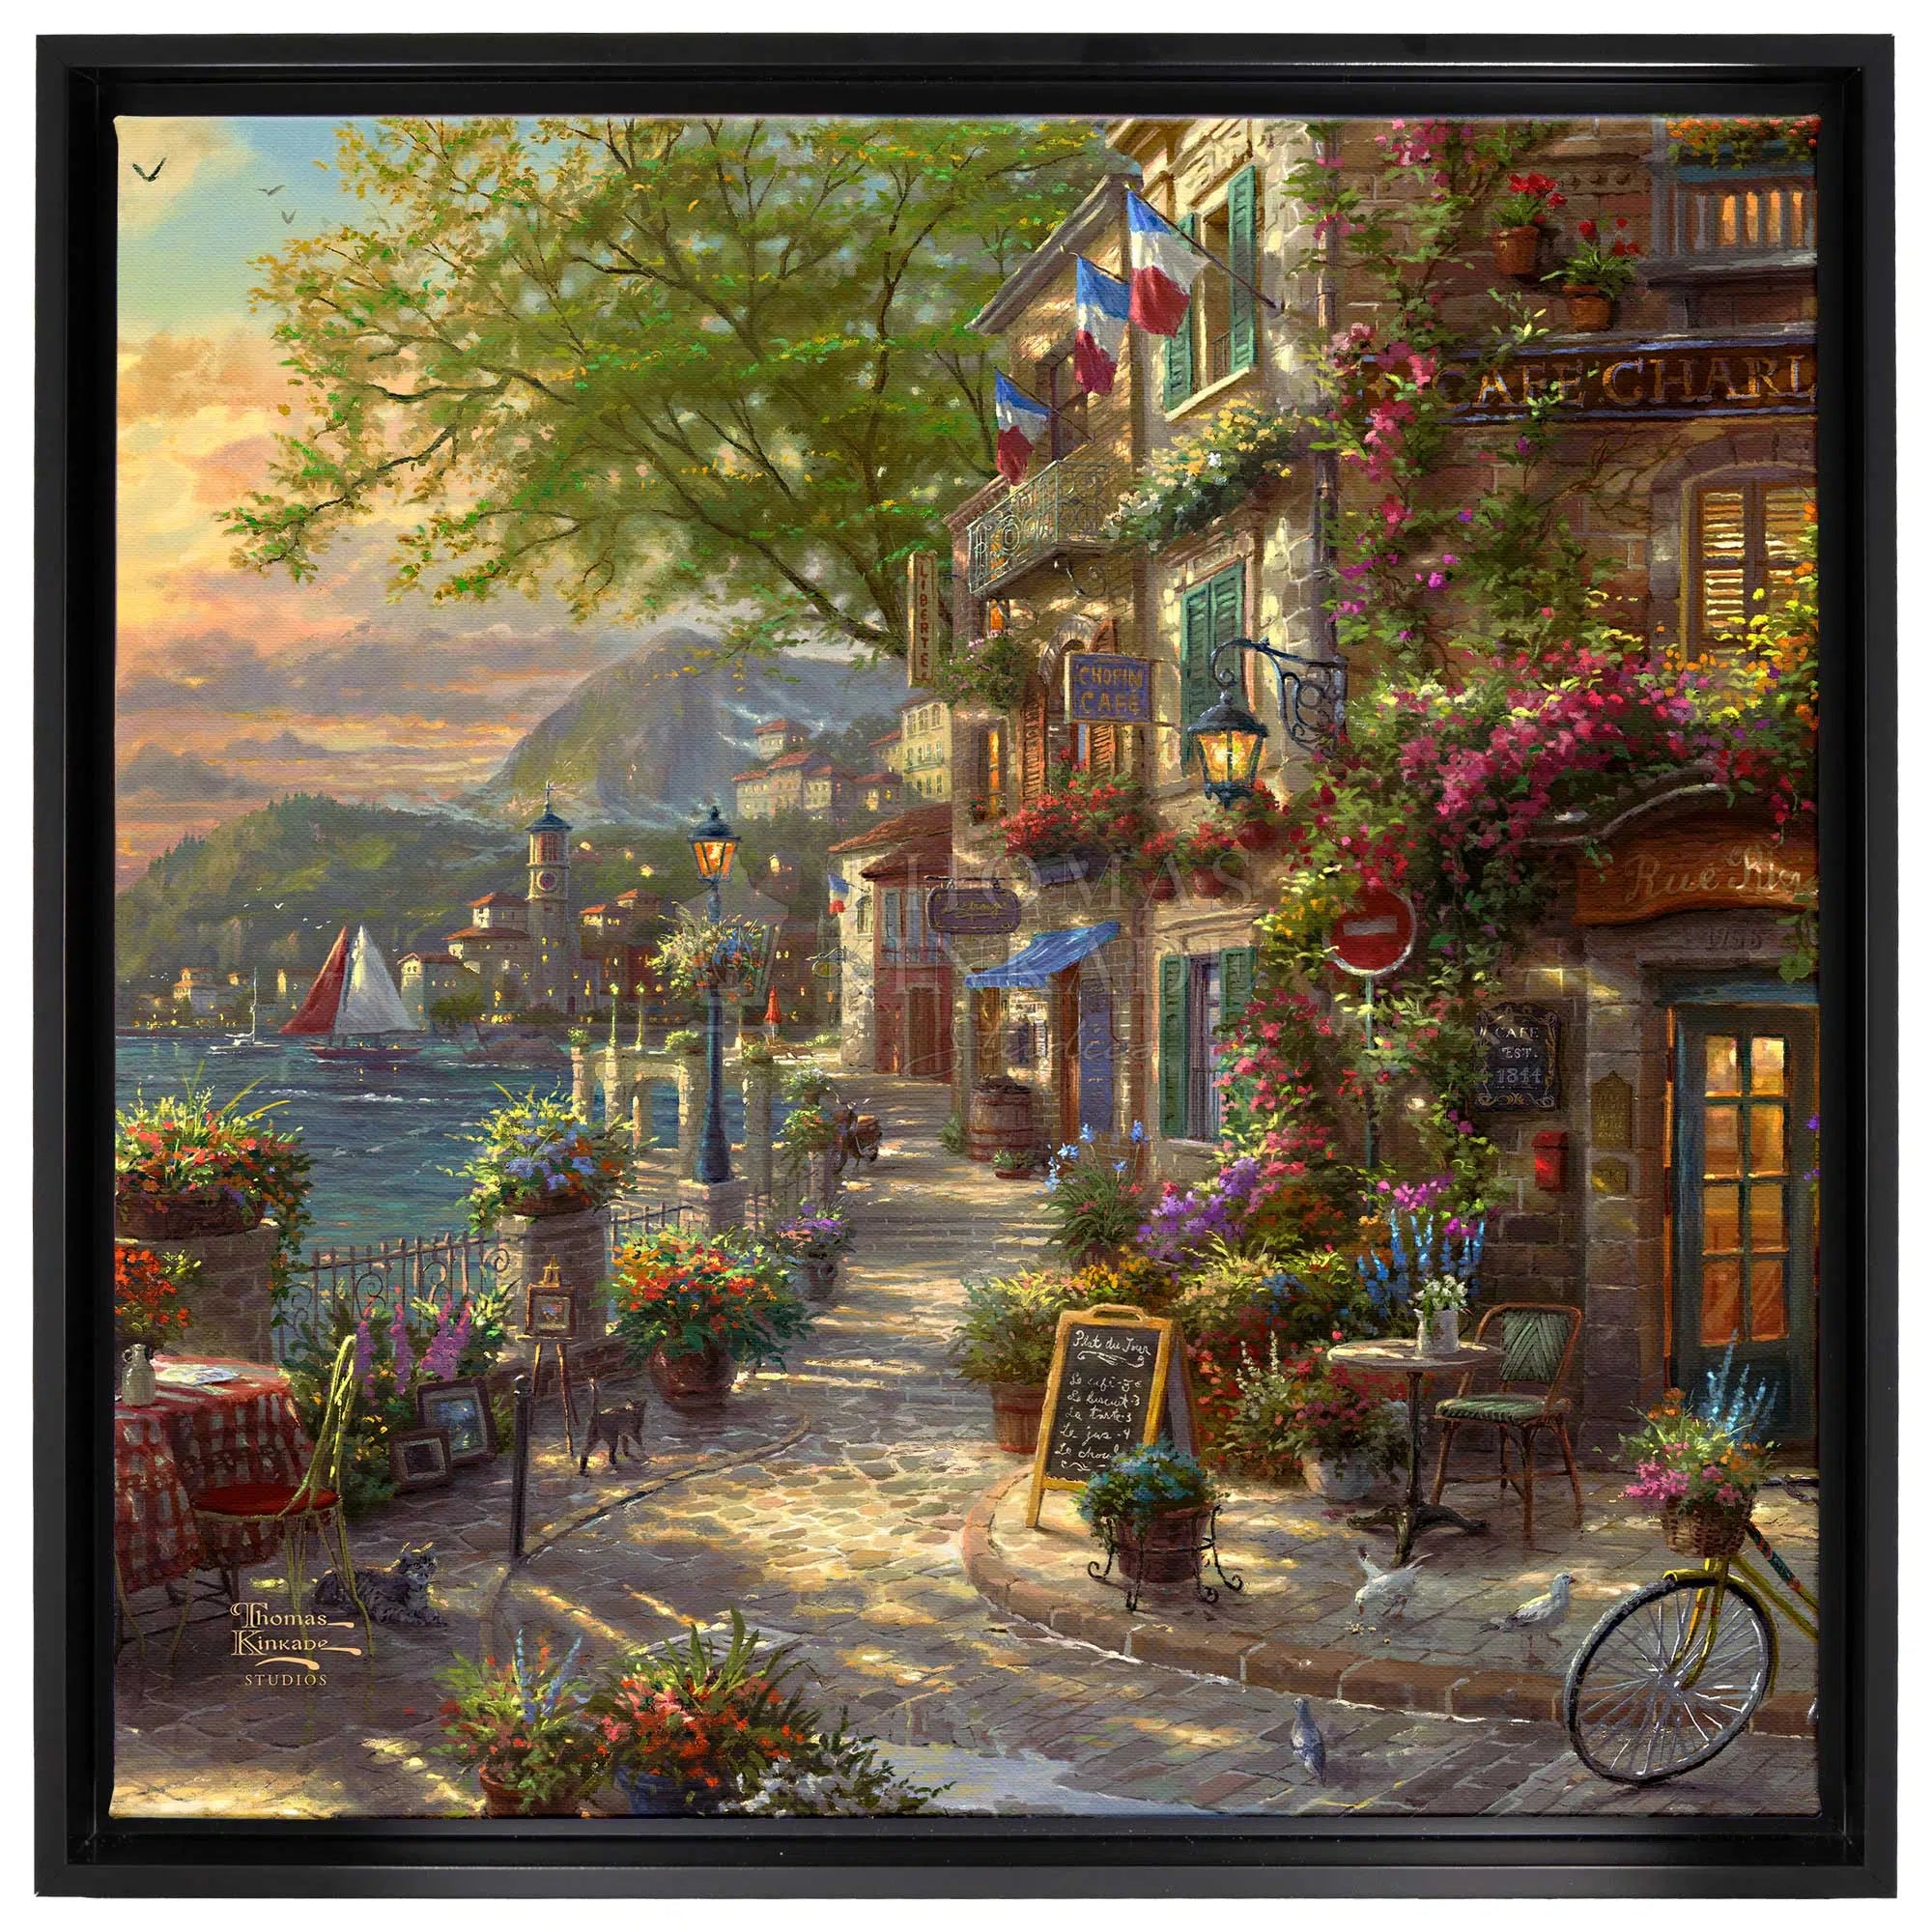 Thomas Kinkade Boise Towne Square Gallery - Art gallery in Boise